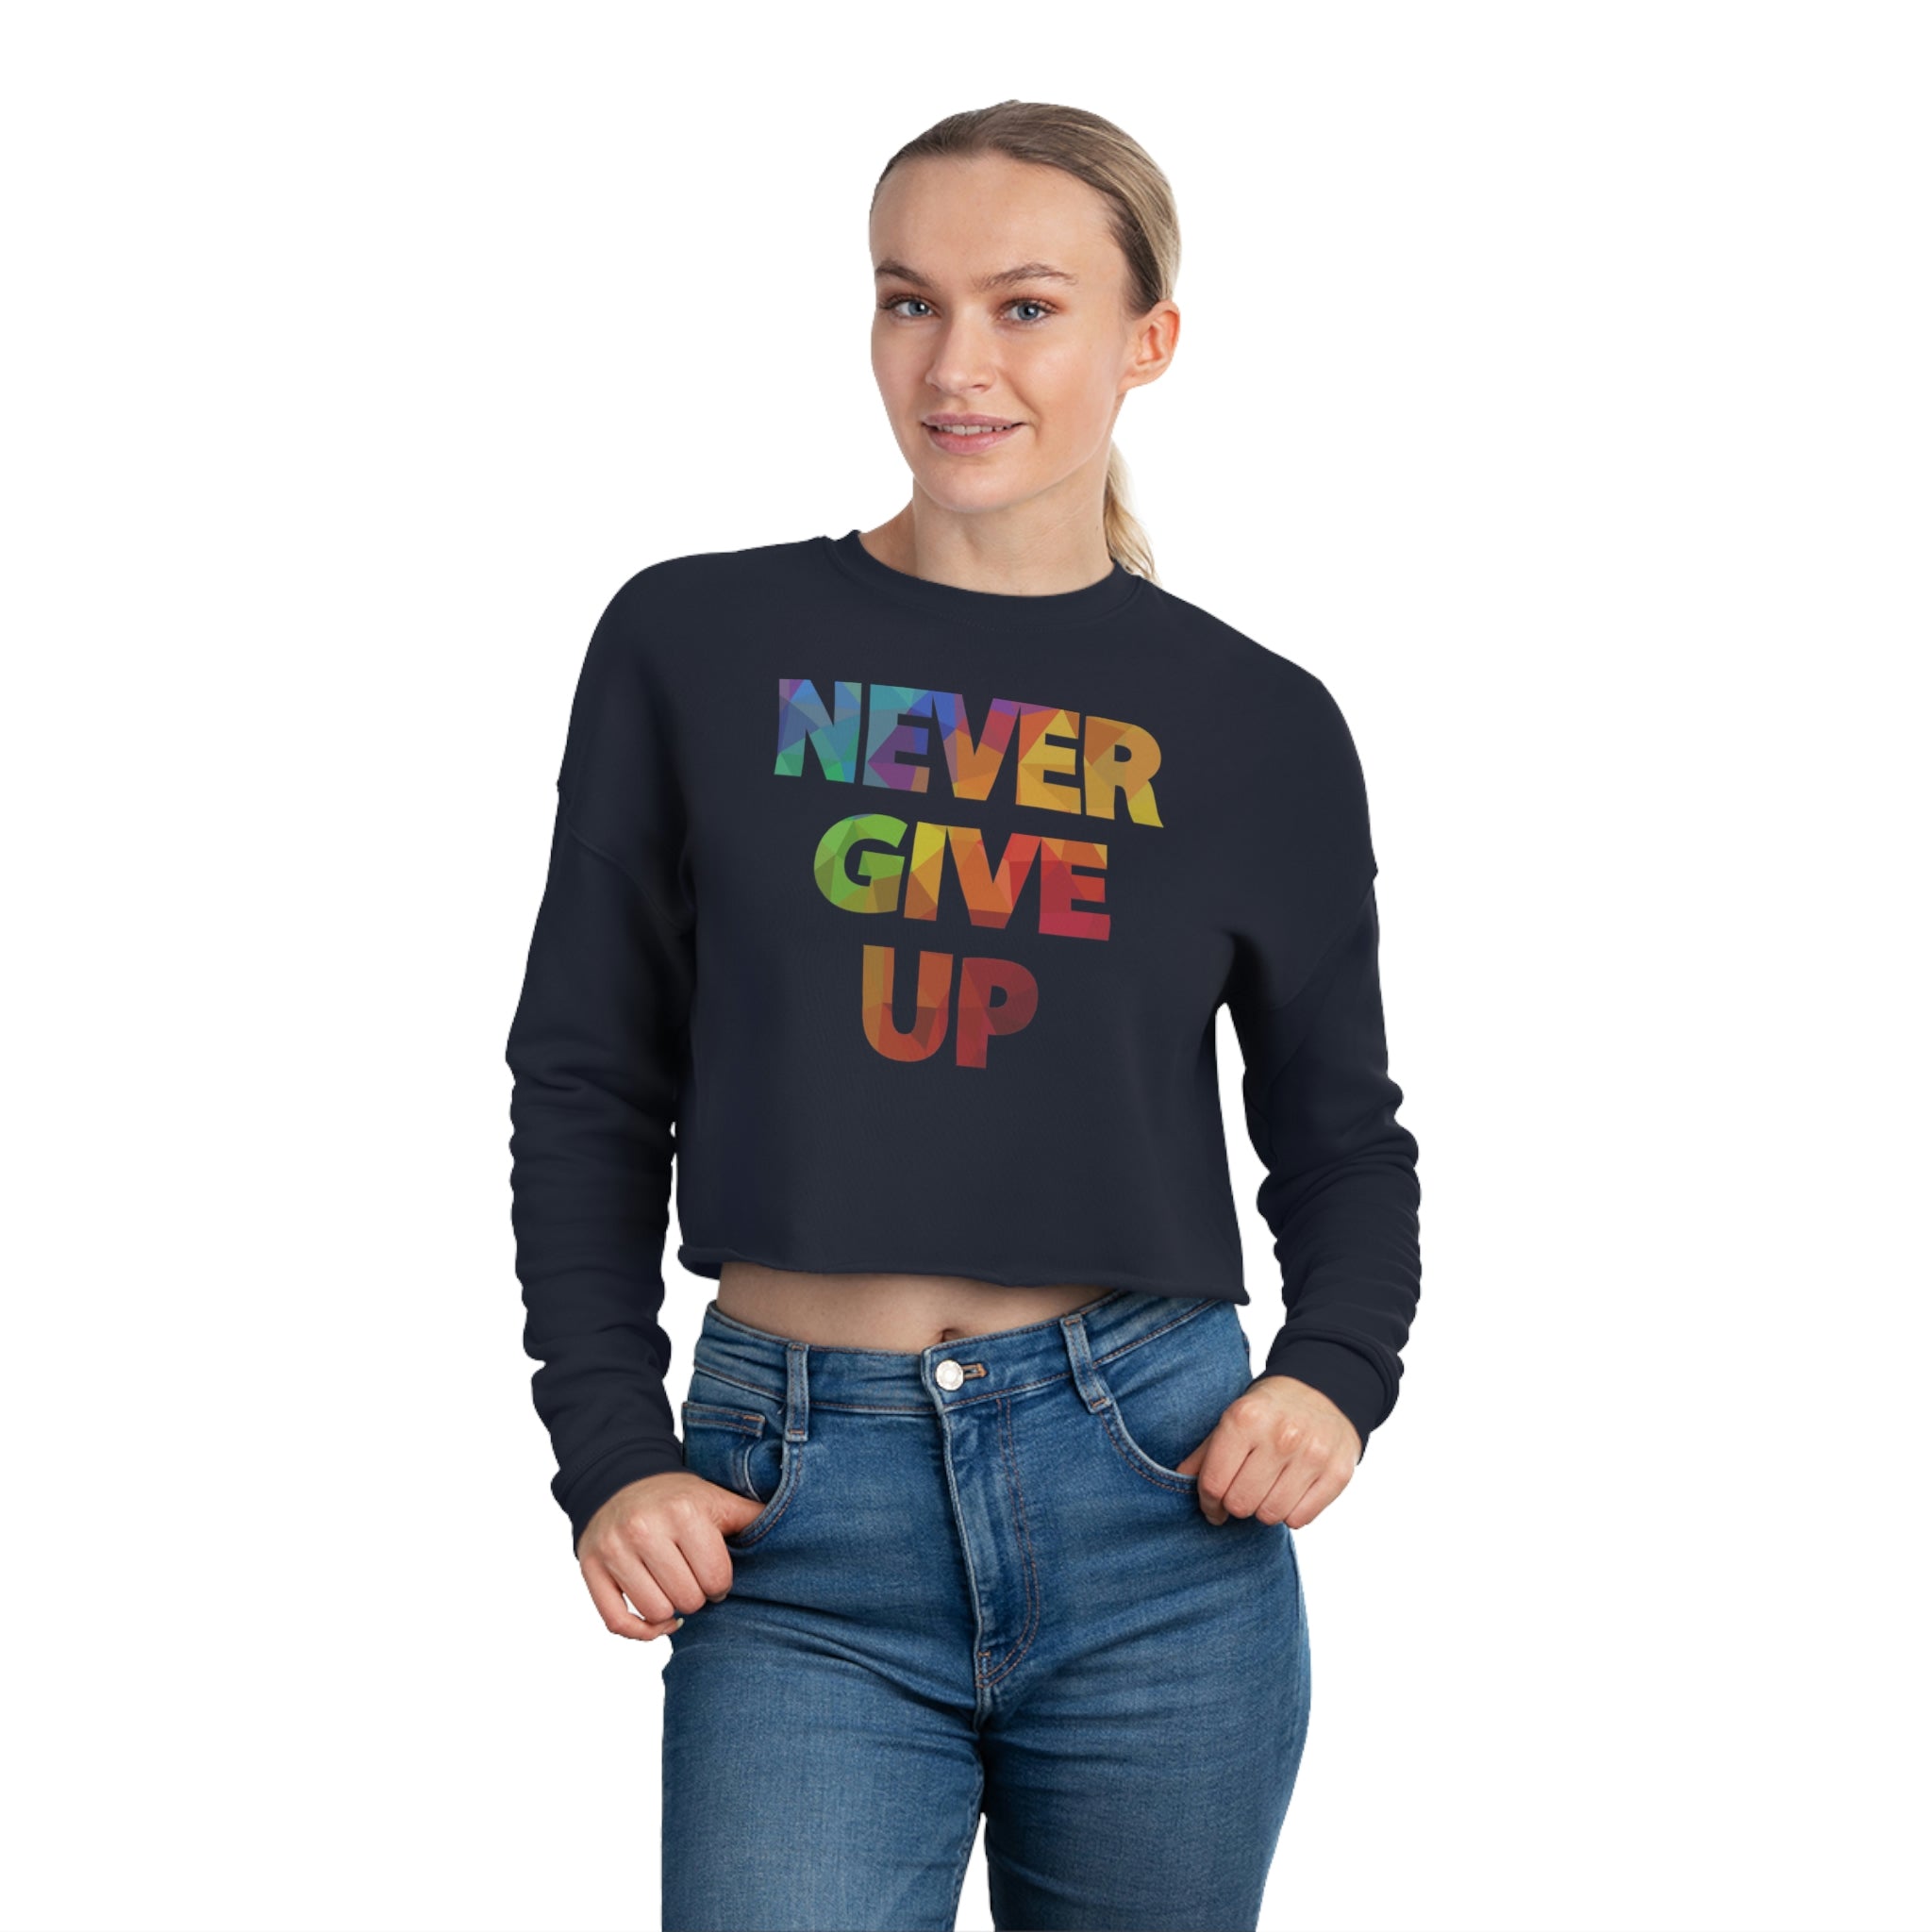 "Never Give Up" Women's Cropped Sweatshirt